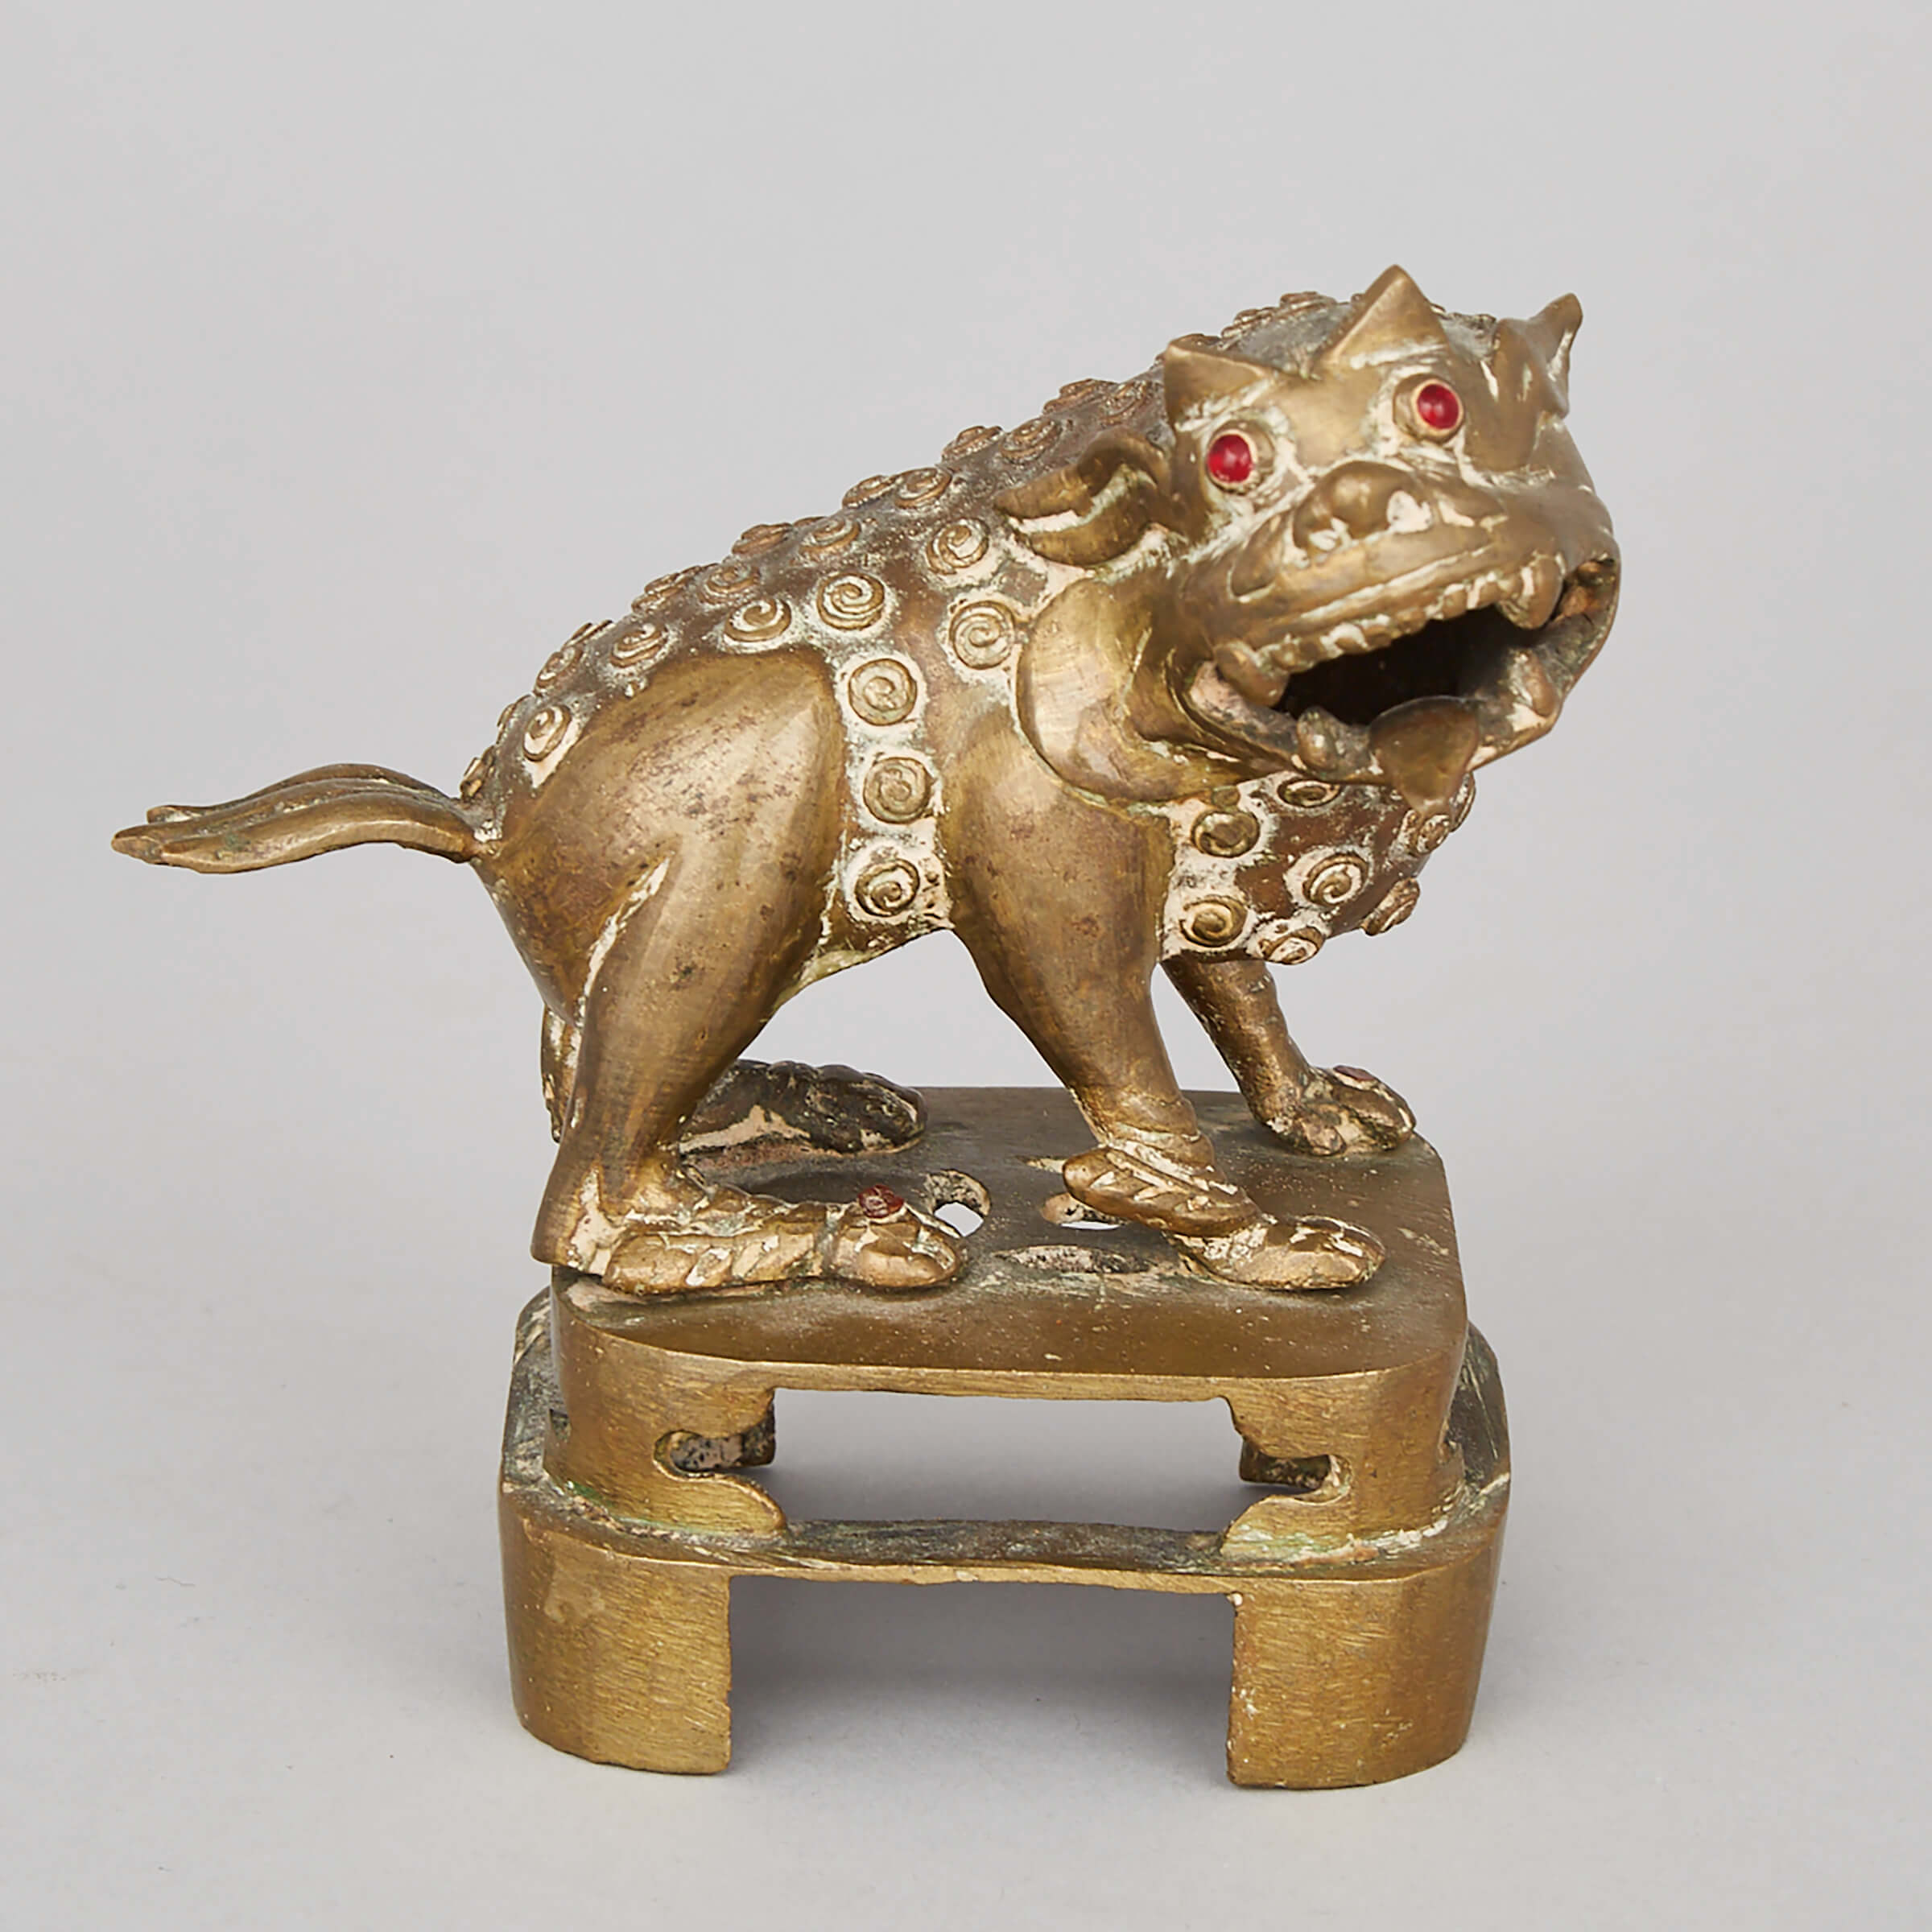 Chinese Bronze Model of a Qilin, mid 20th century